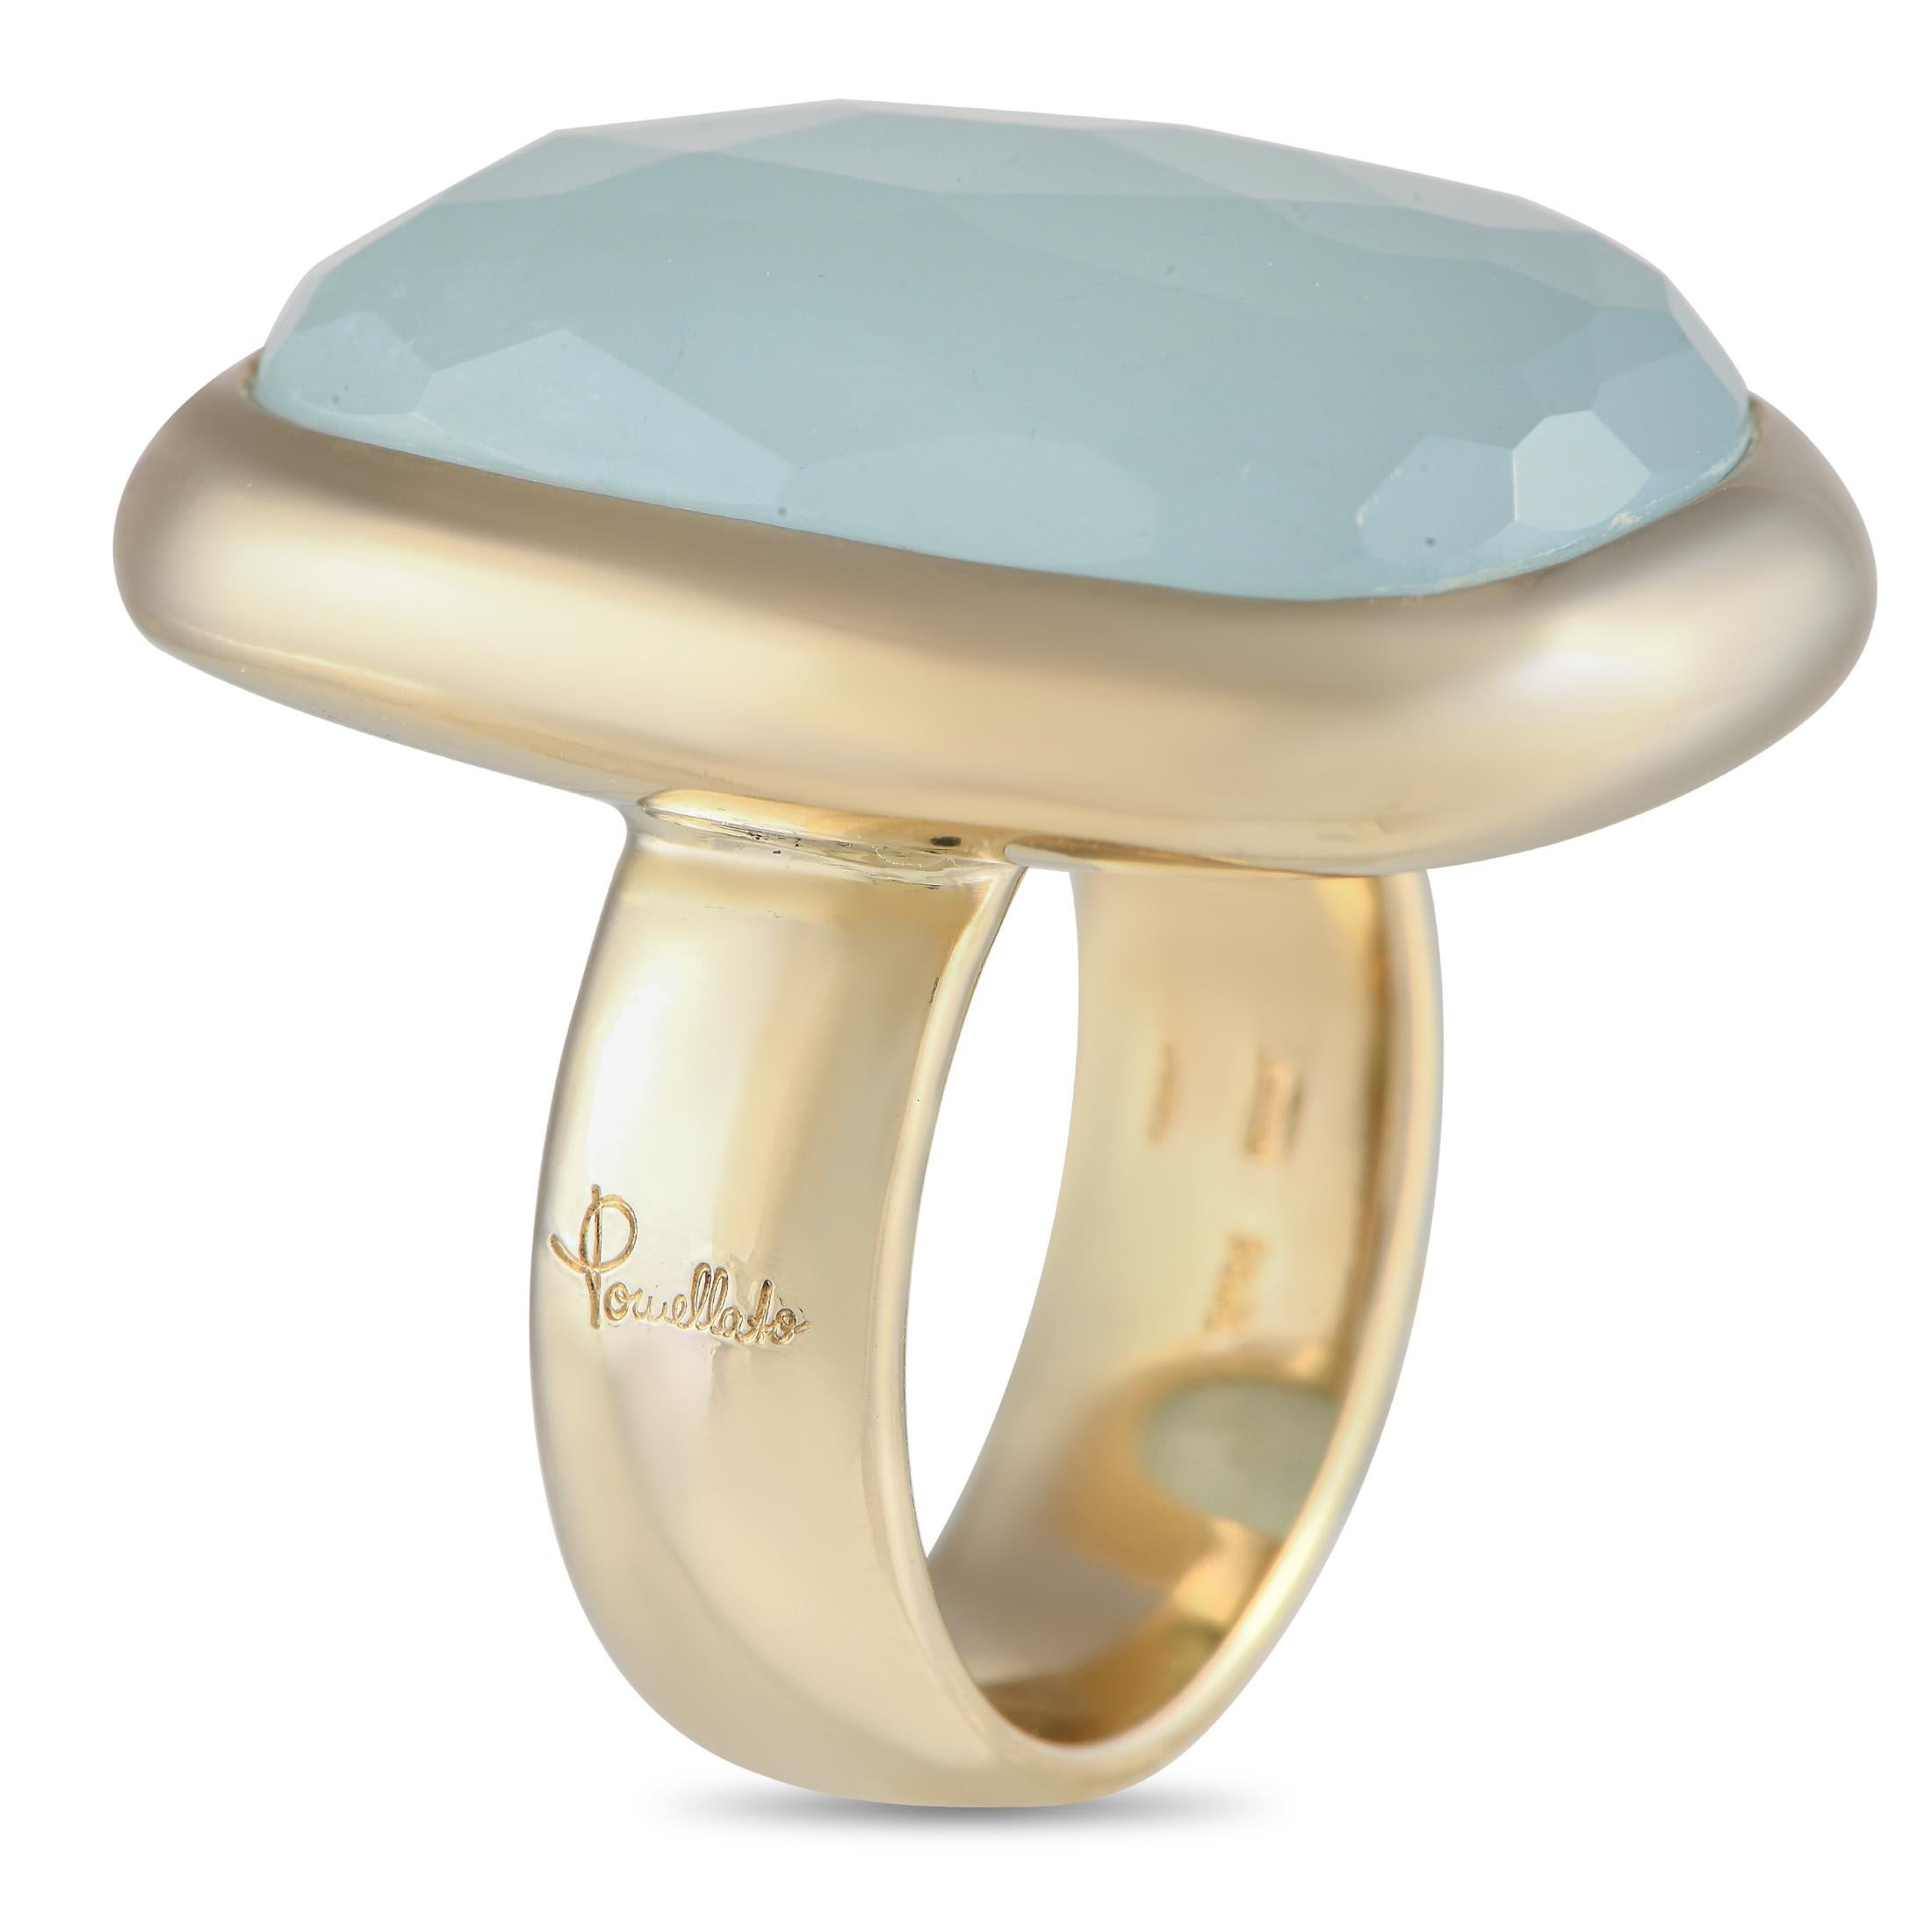 A breathtaking Aquamarine gemstone serves as a stunning focal point at the center of this impeccably crafted Pomellato ring. This piece’s minimalist 18K Yellow Gold setting features a 6mm band width and a 10mm top height. 